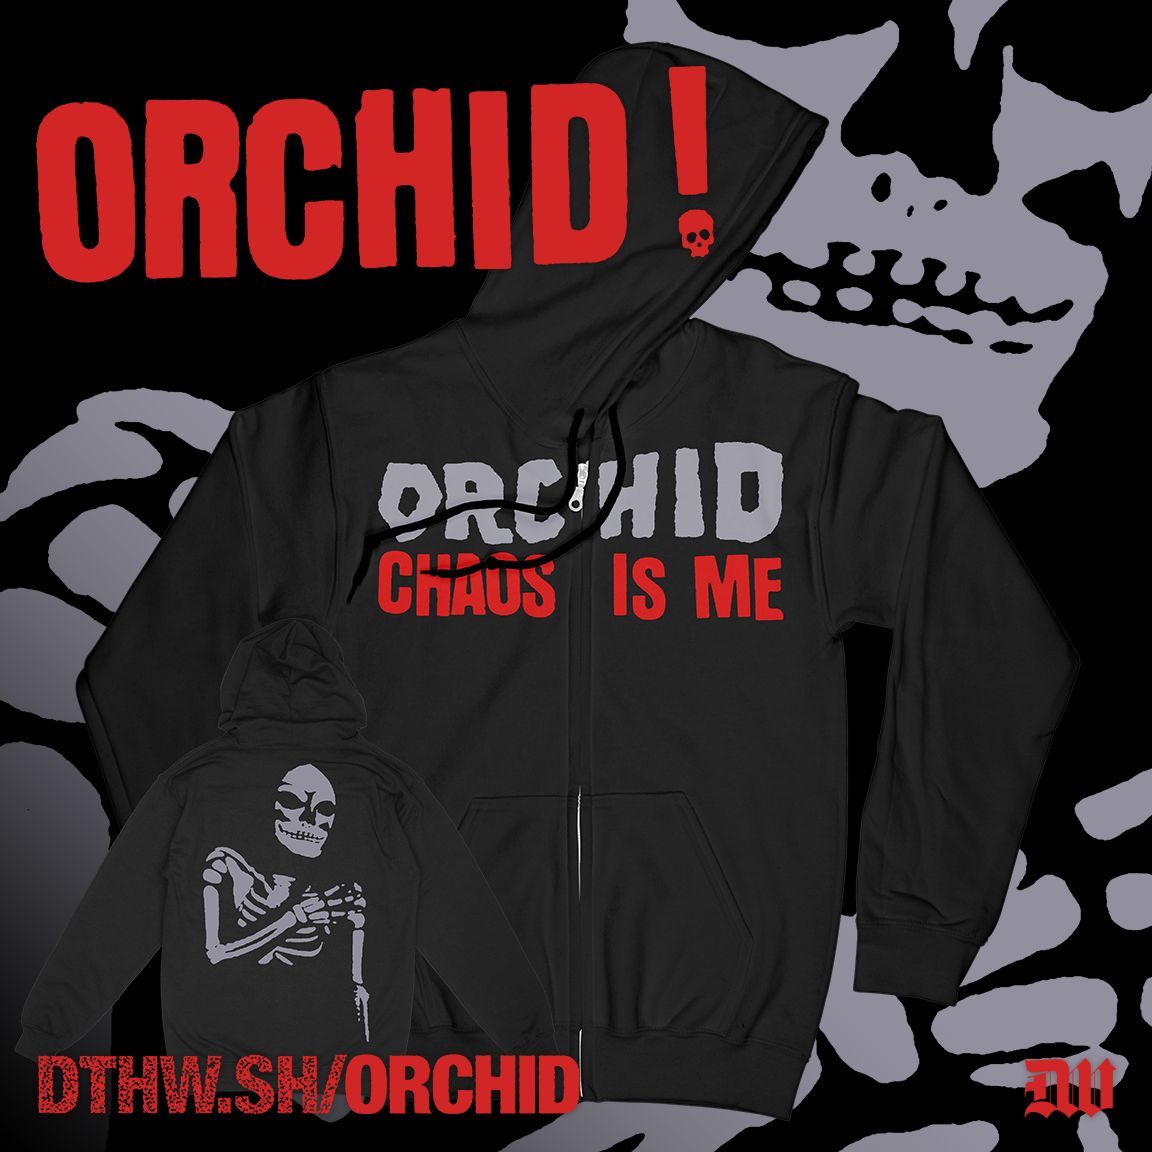 Orchid x Deathwish Store Merch & Music → dthw.sh/orchid Upcoming Shows: 06/01 - Toronto, ON | Phoenix Theater